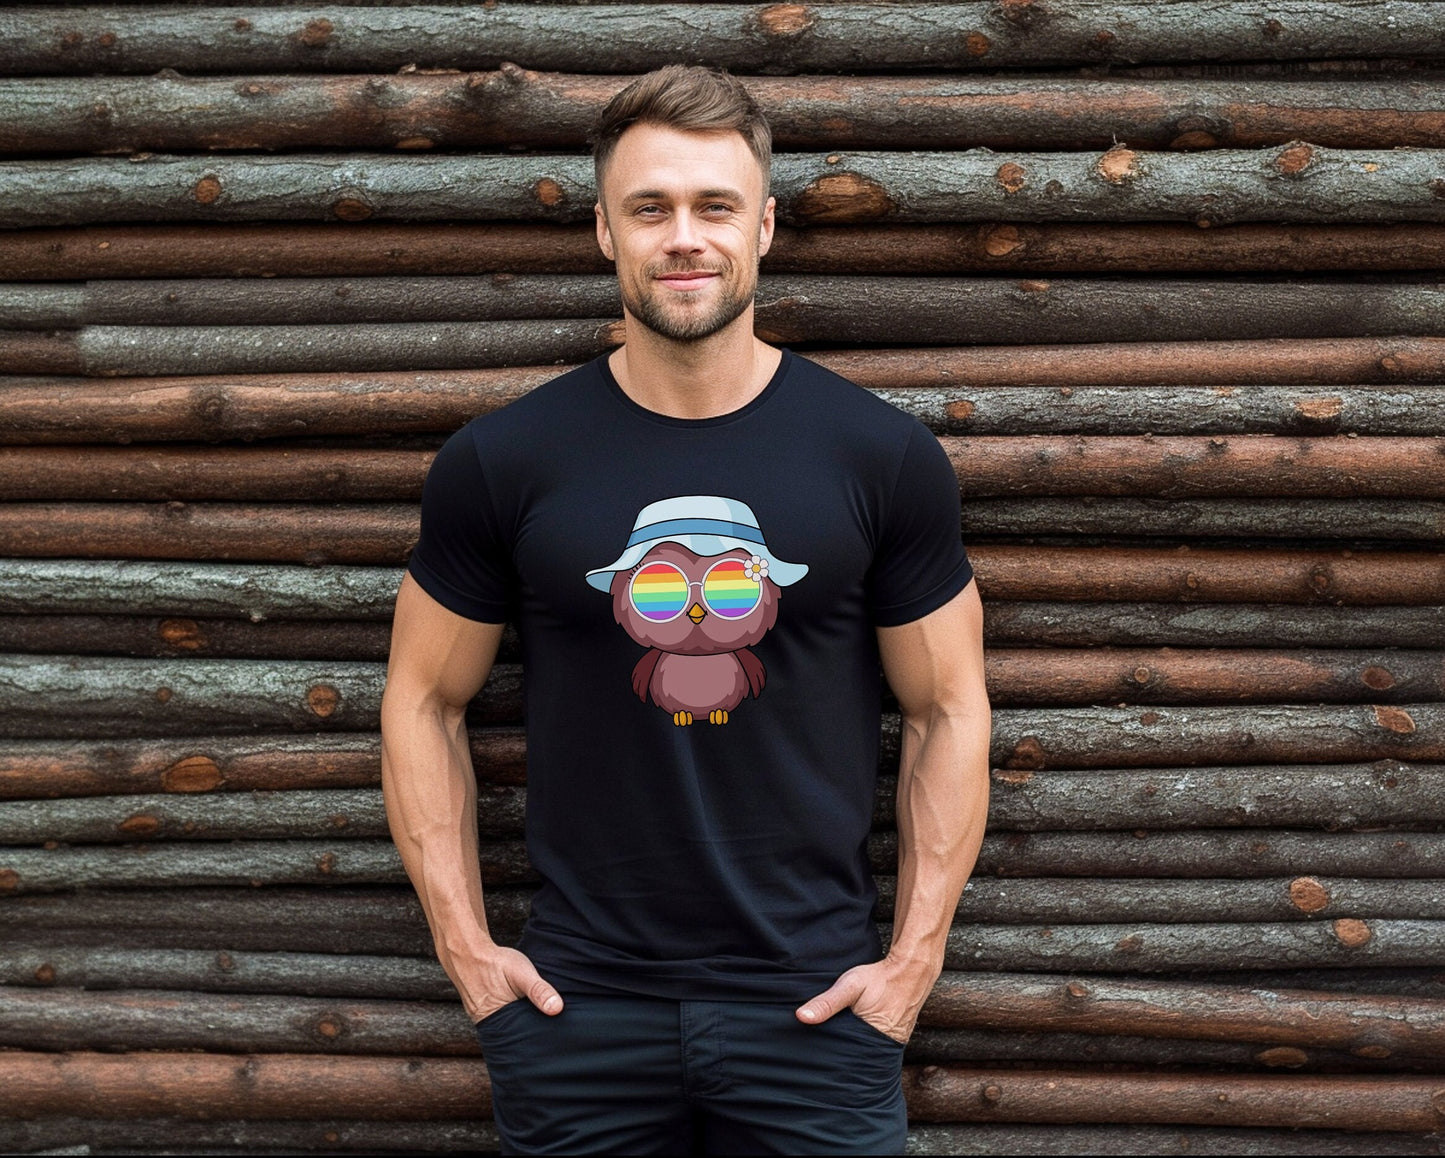 Super cute owl with rainbow glasses shirt blue hat, Rainbow glasses on an adorable owl, precious owl showing off pride. Beautiful pride owl